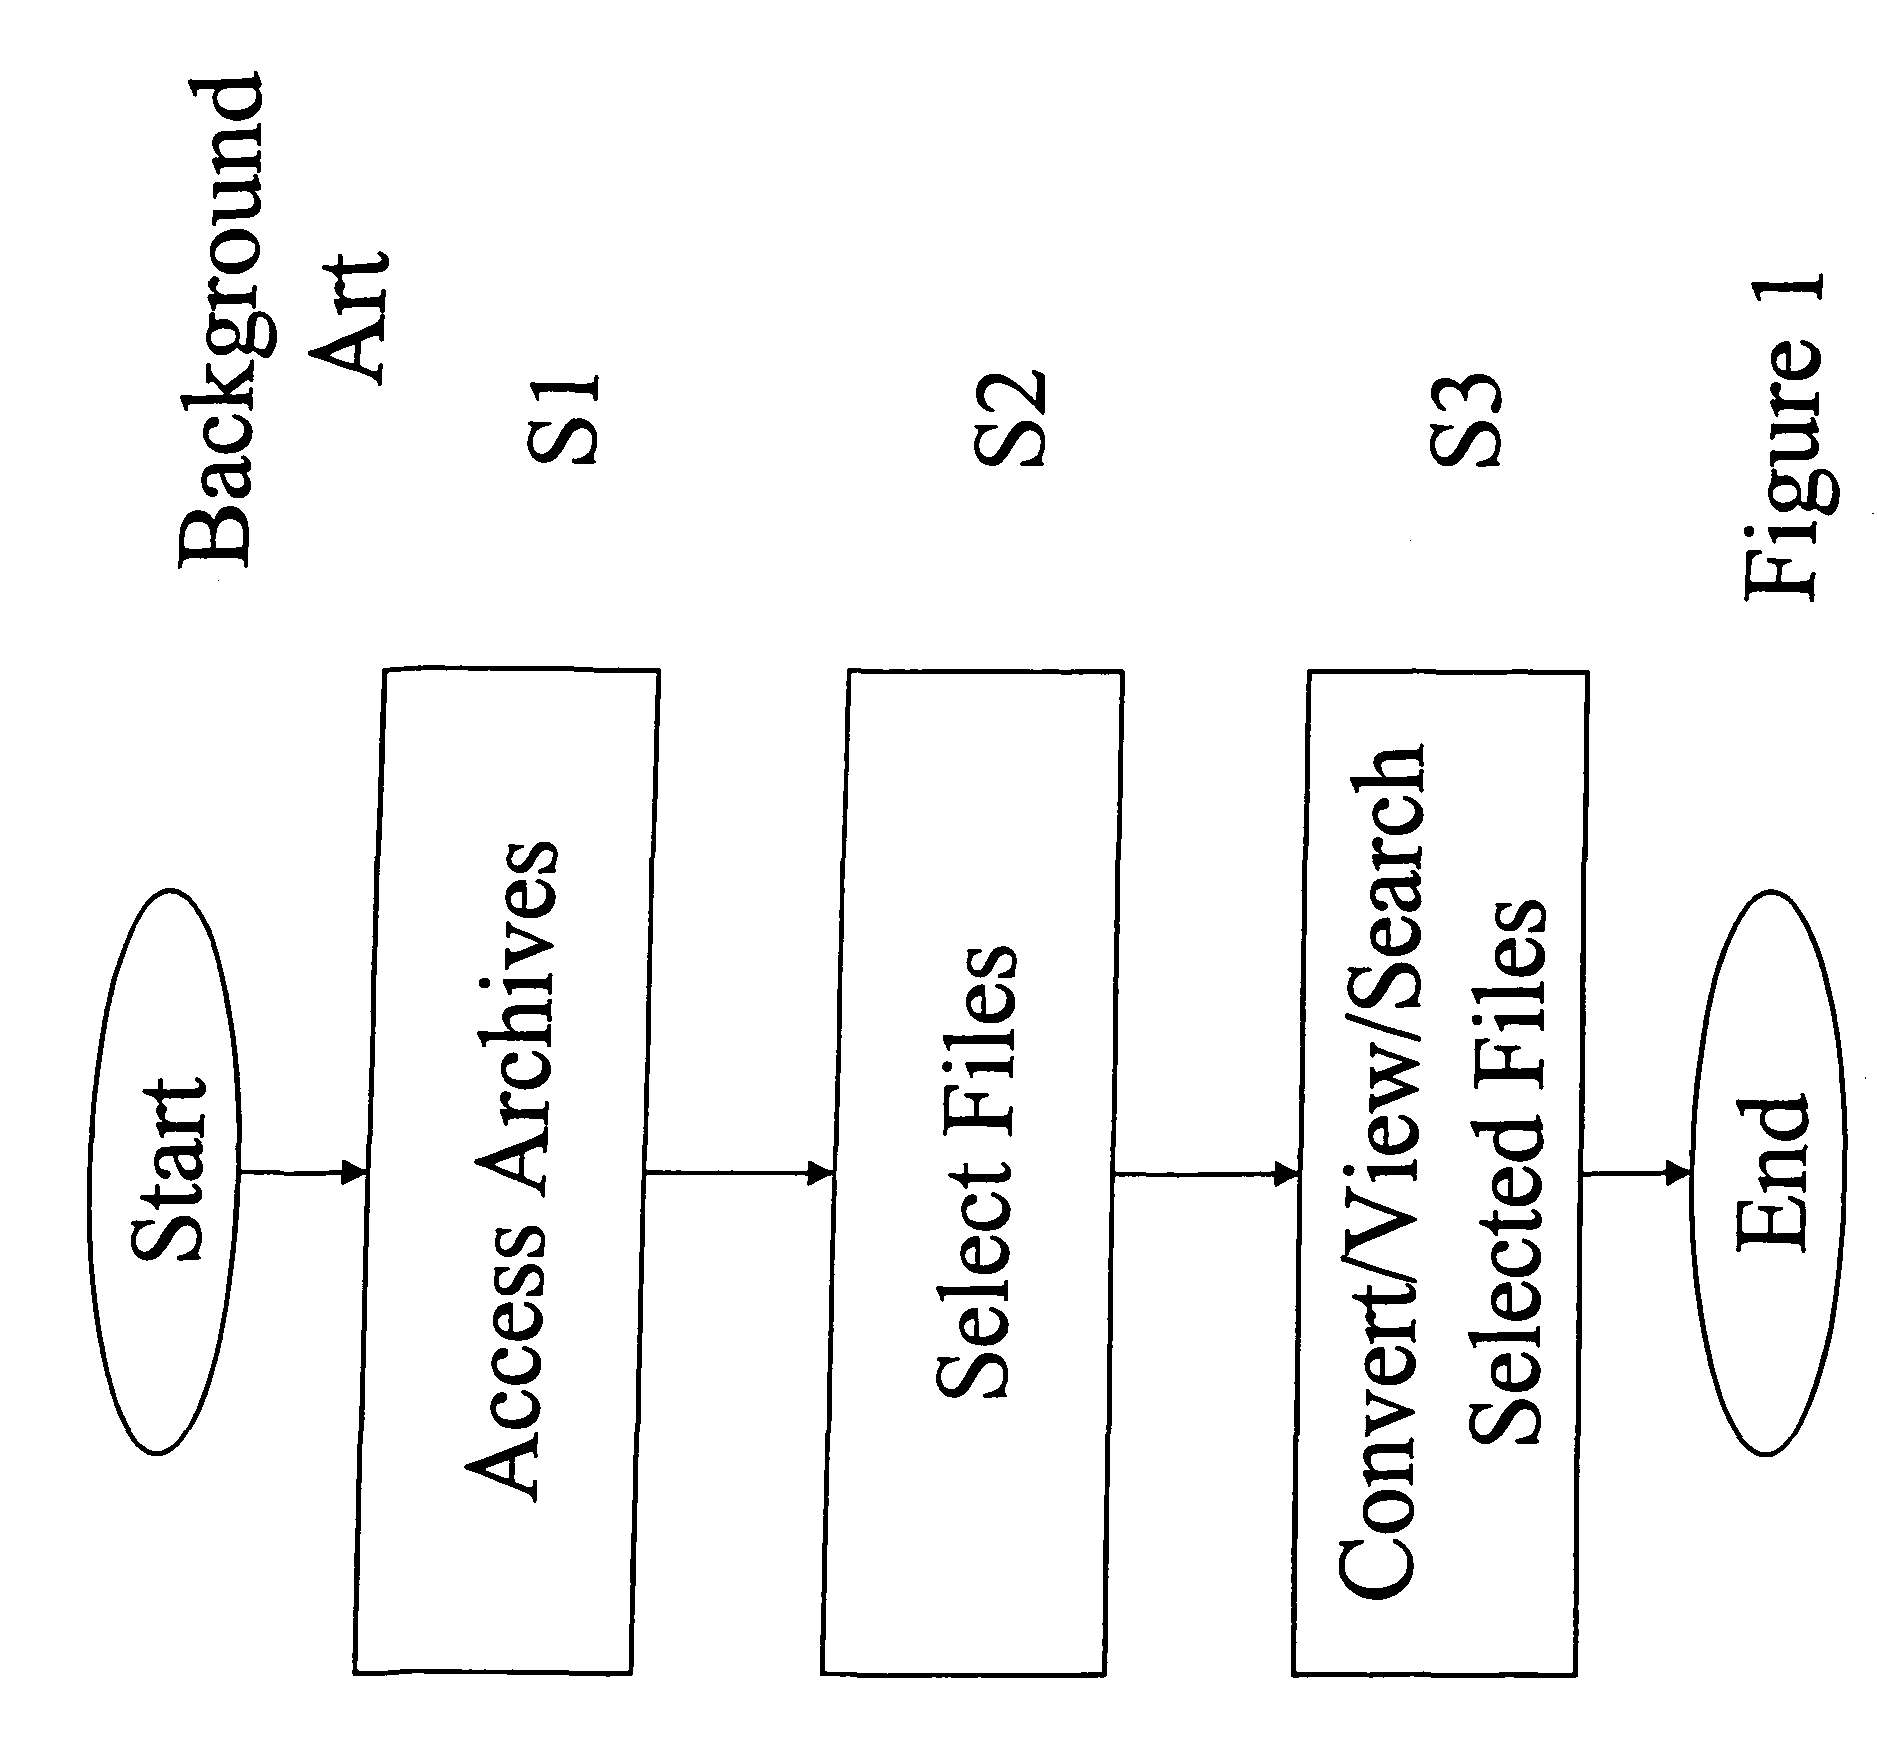 Method, system, and computer program product for processing and converting electronically-stored data for electronic discovery and support of litigation using a processor-based device located at a user-site